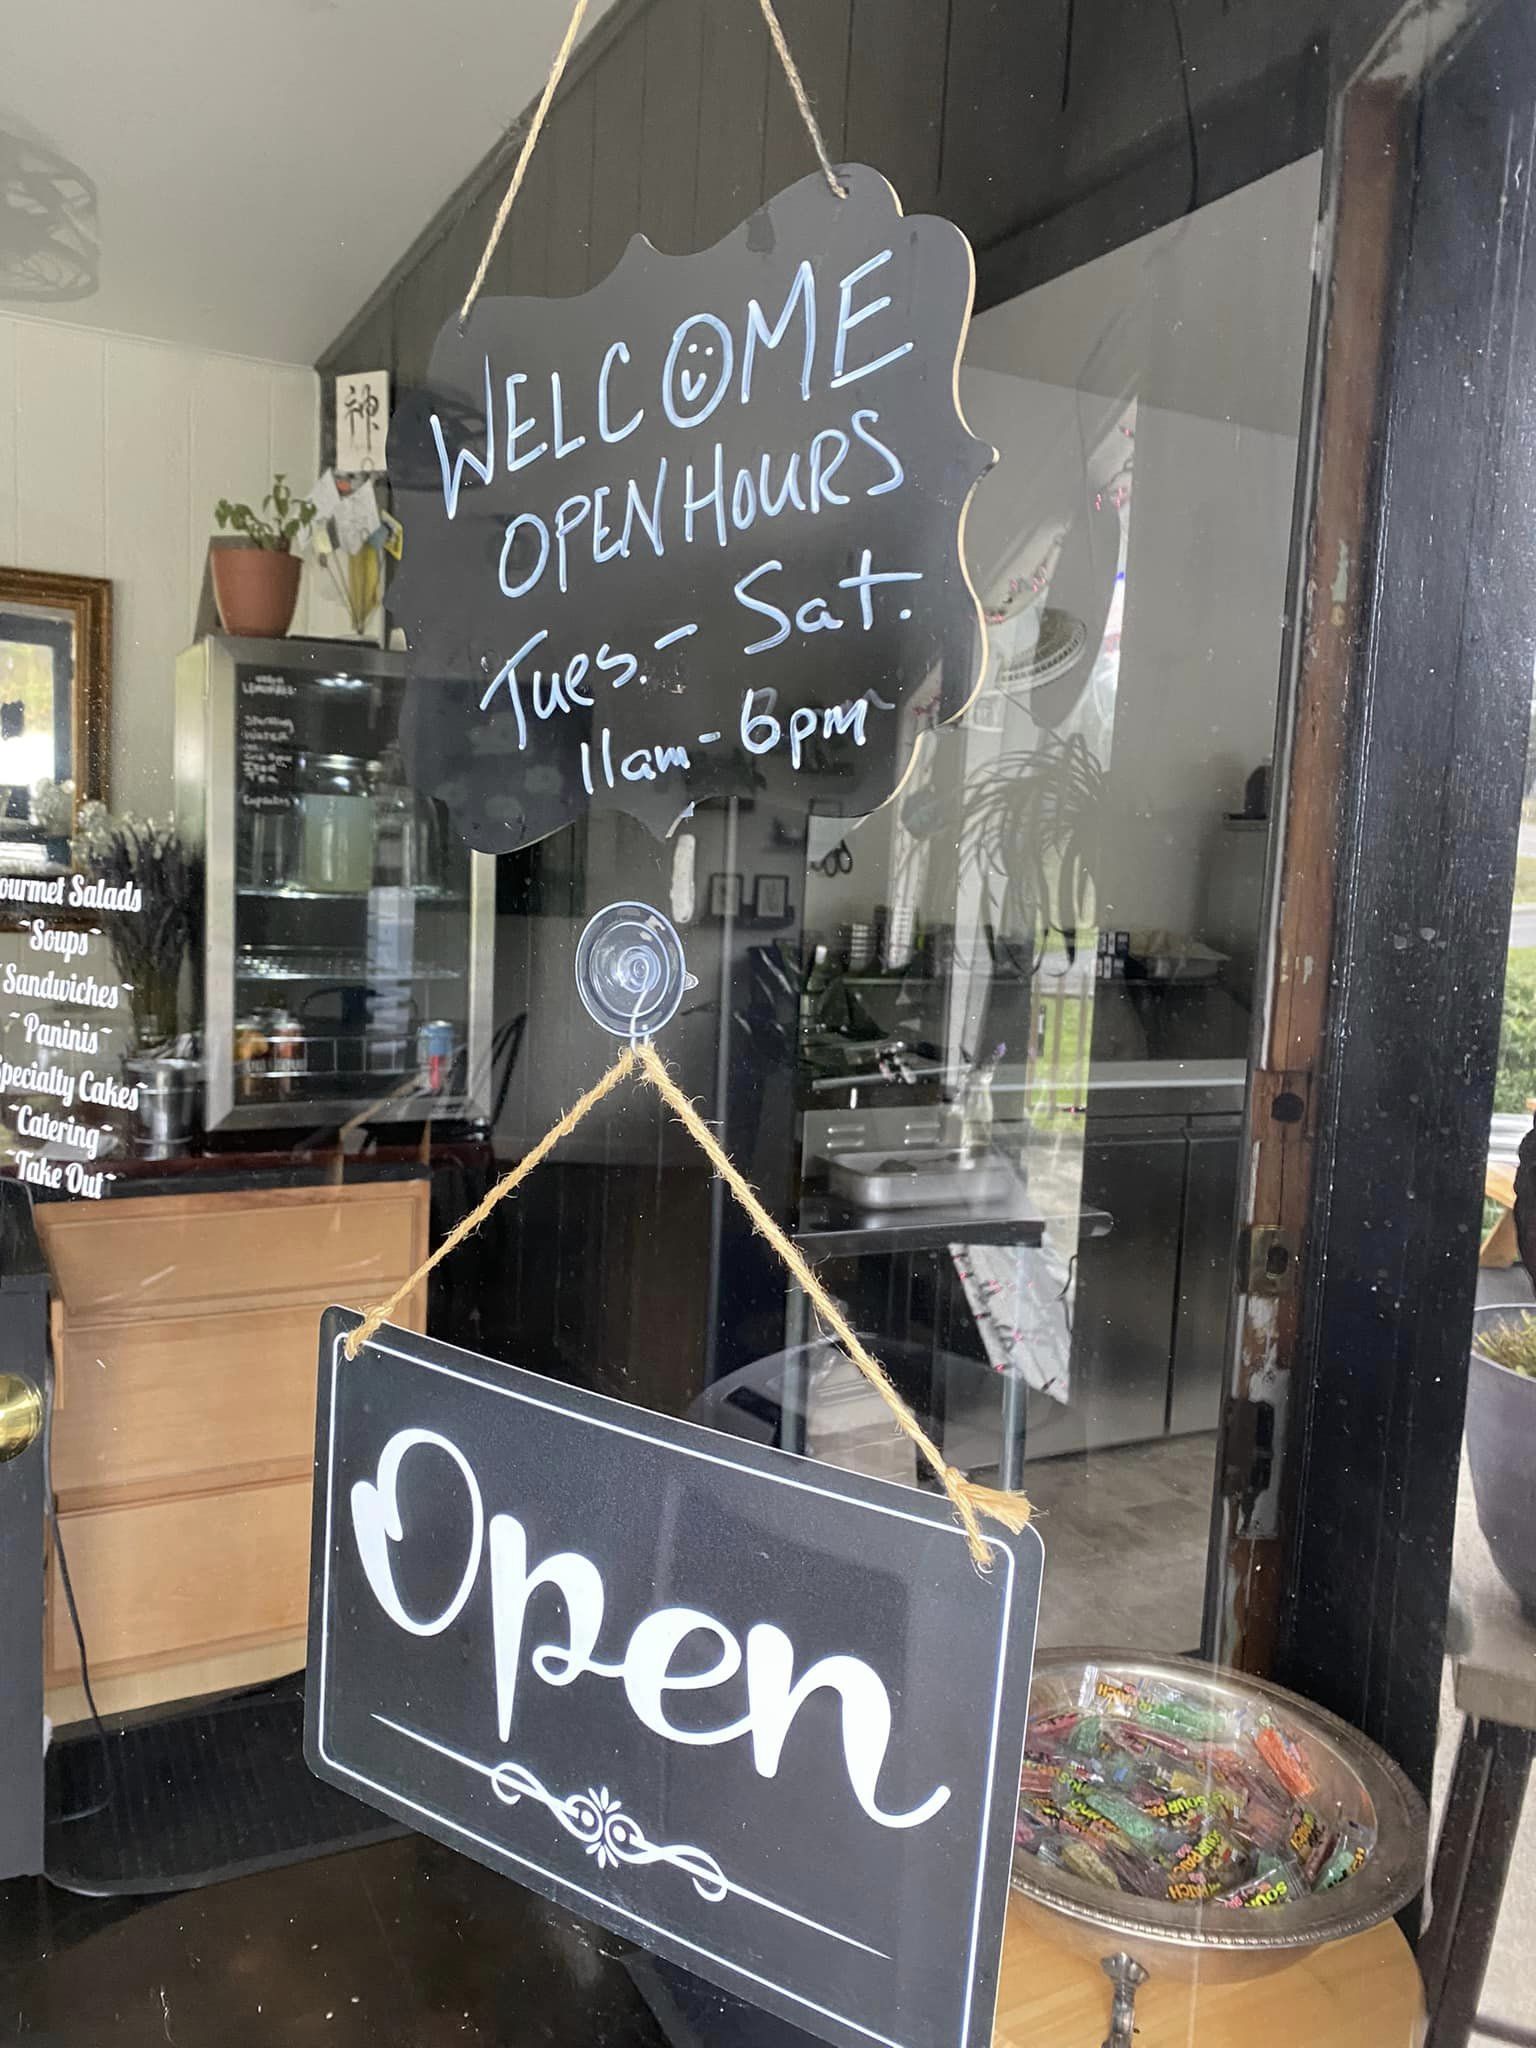 Welcome sign with hours of operation at Divine South Kitchen and Catering in Gold Beach, Oregon